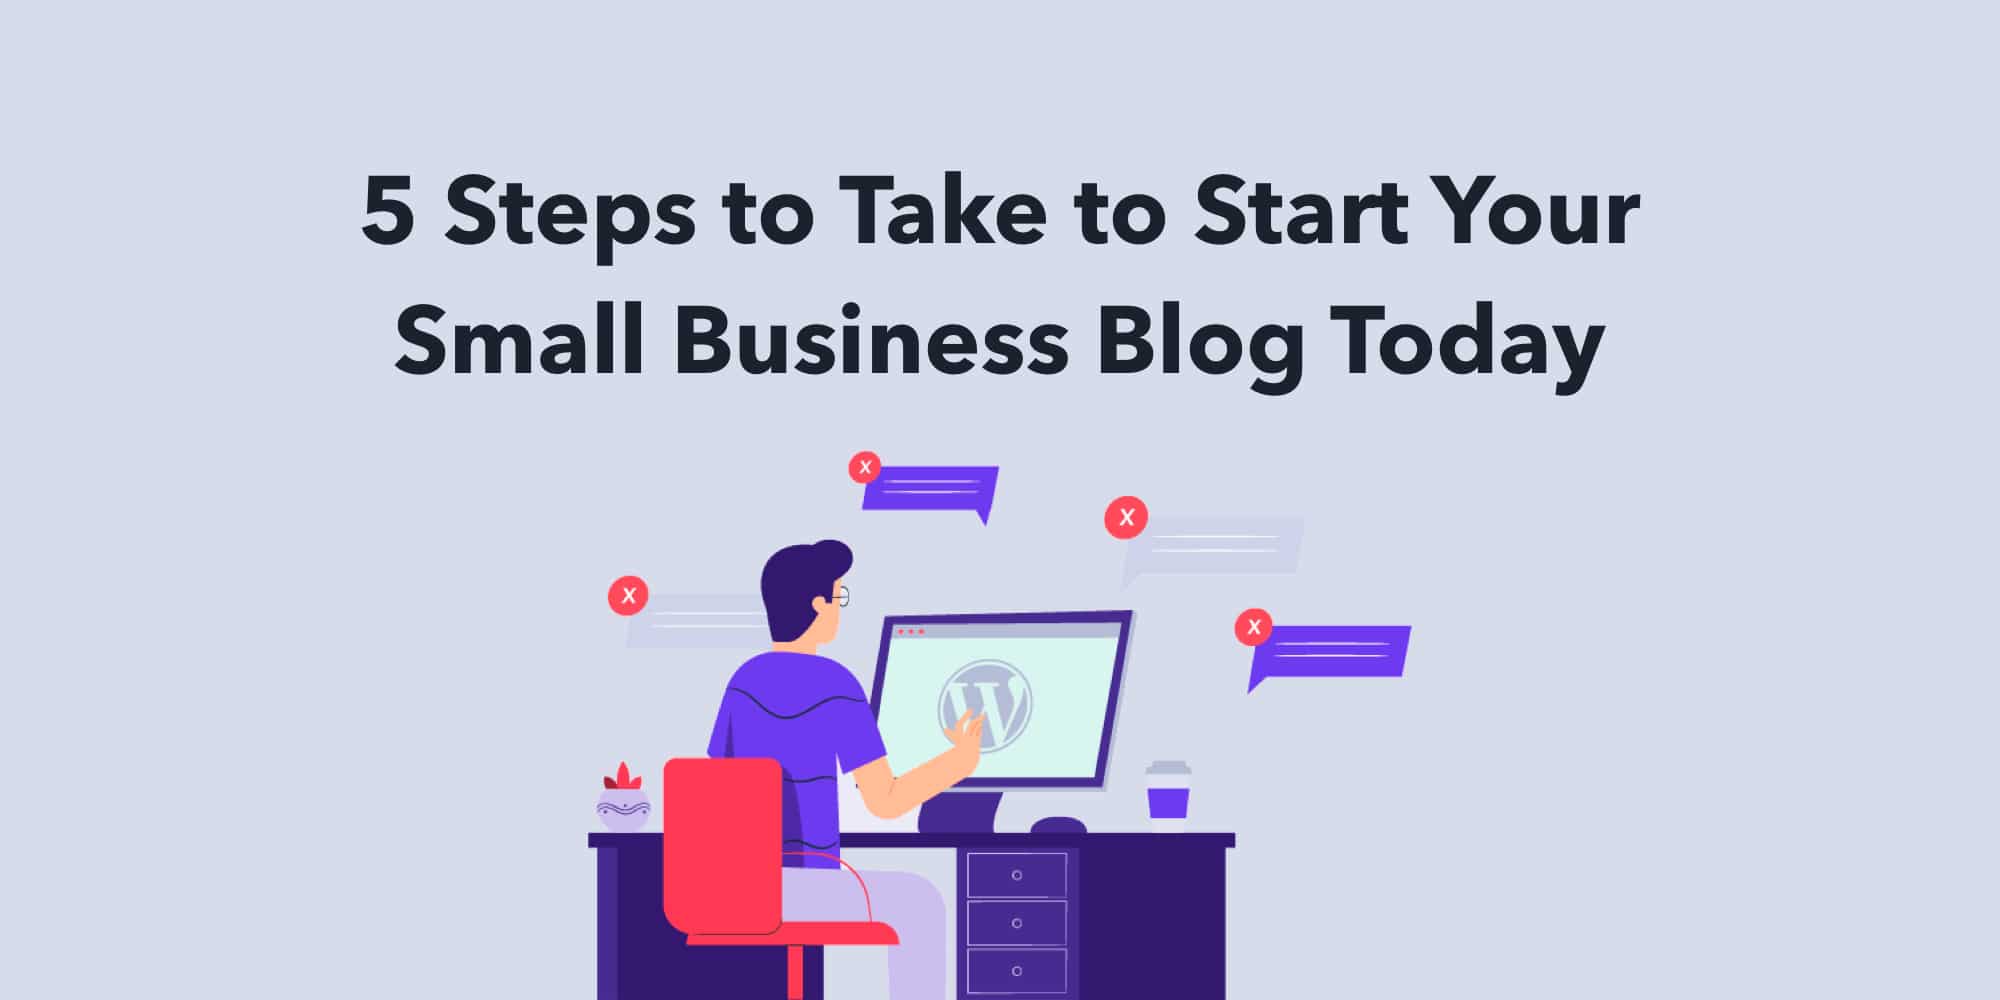 5 Steps to Take to Start Your Small Business Blog Today